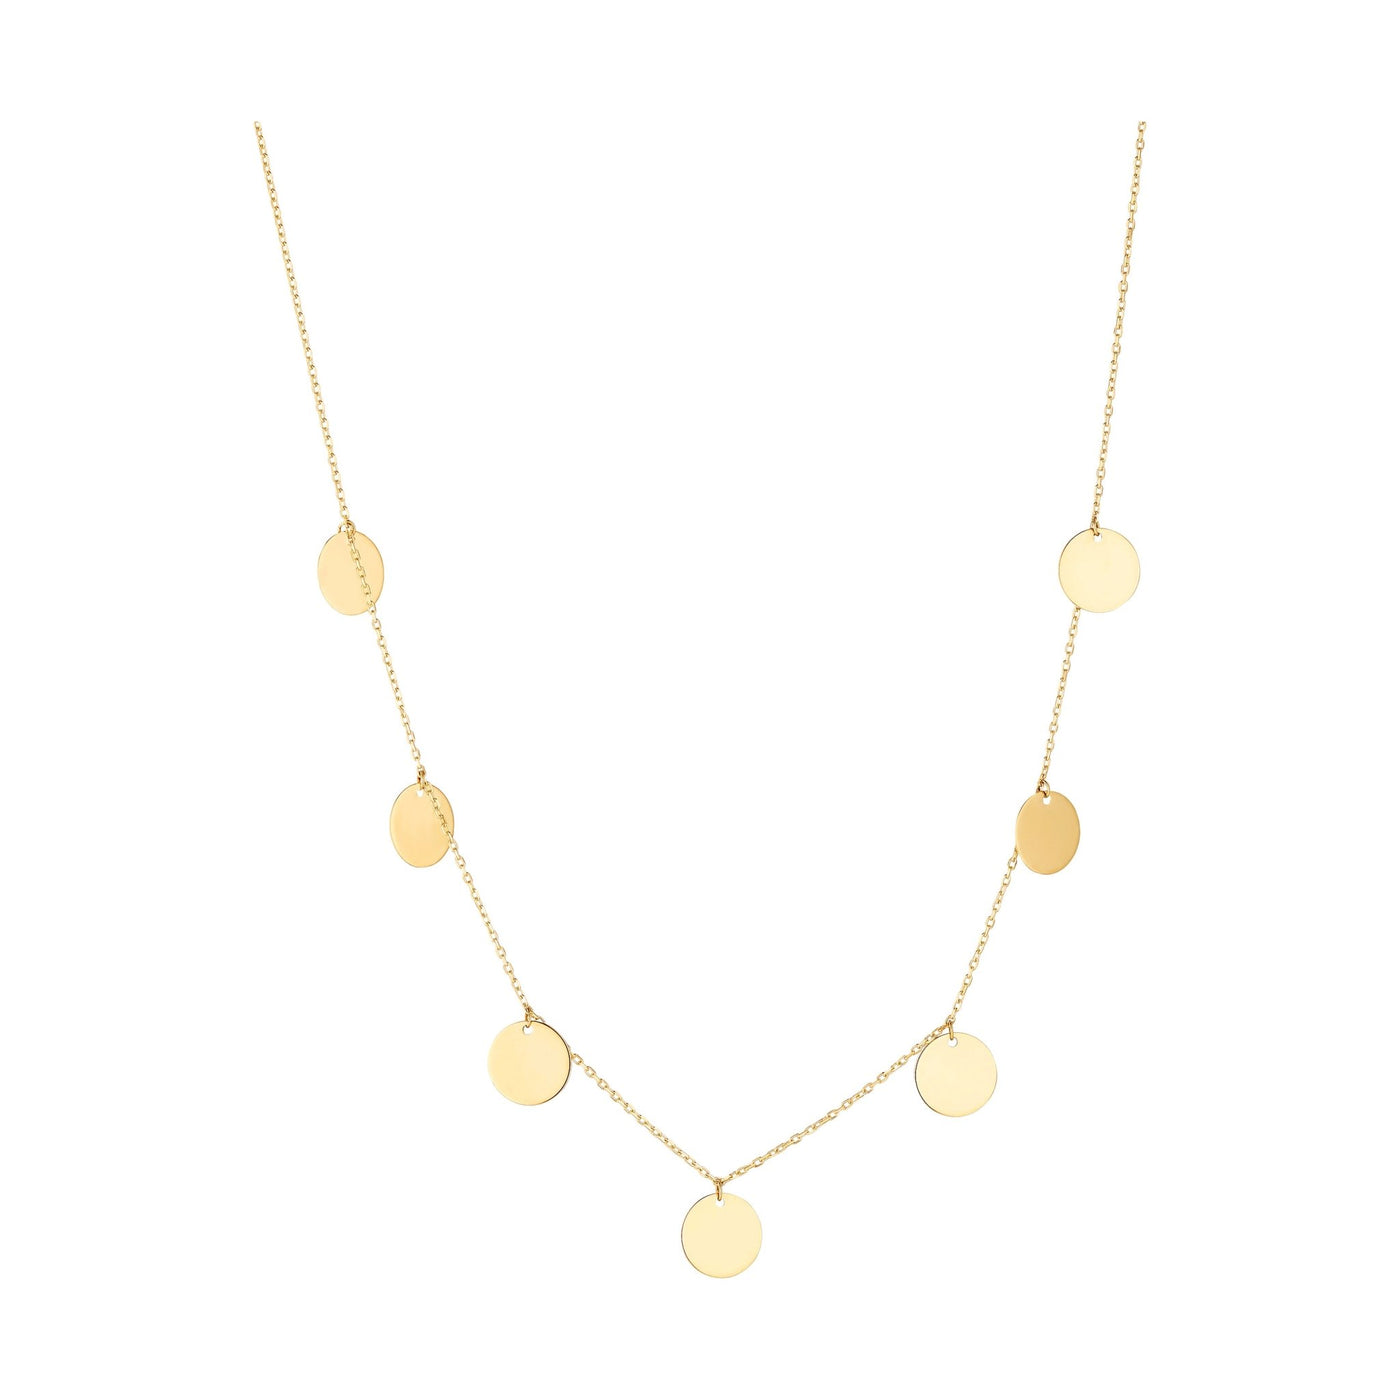 PLATE NECKLACE 585 GOLD - IDENTIM®